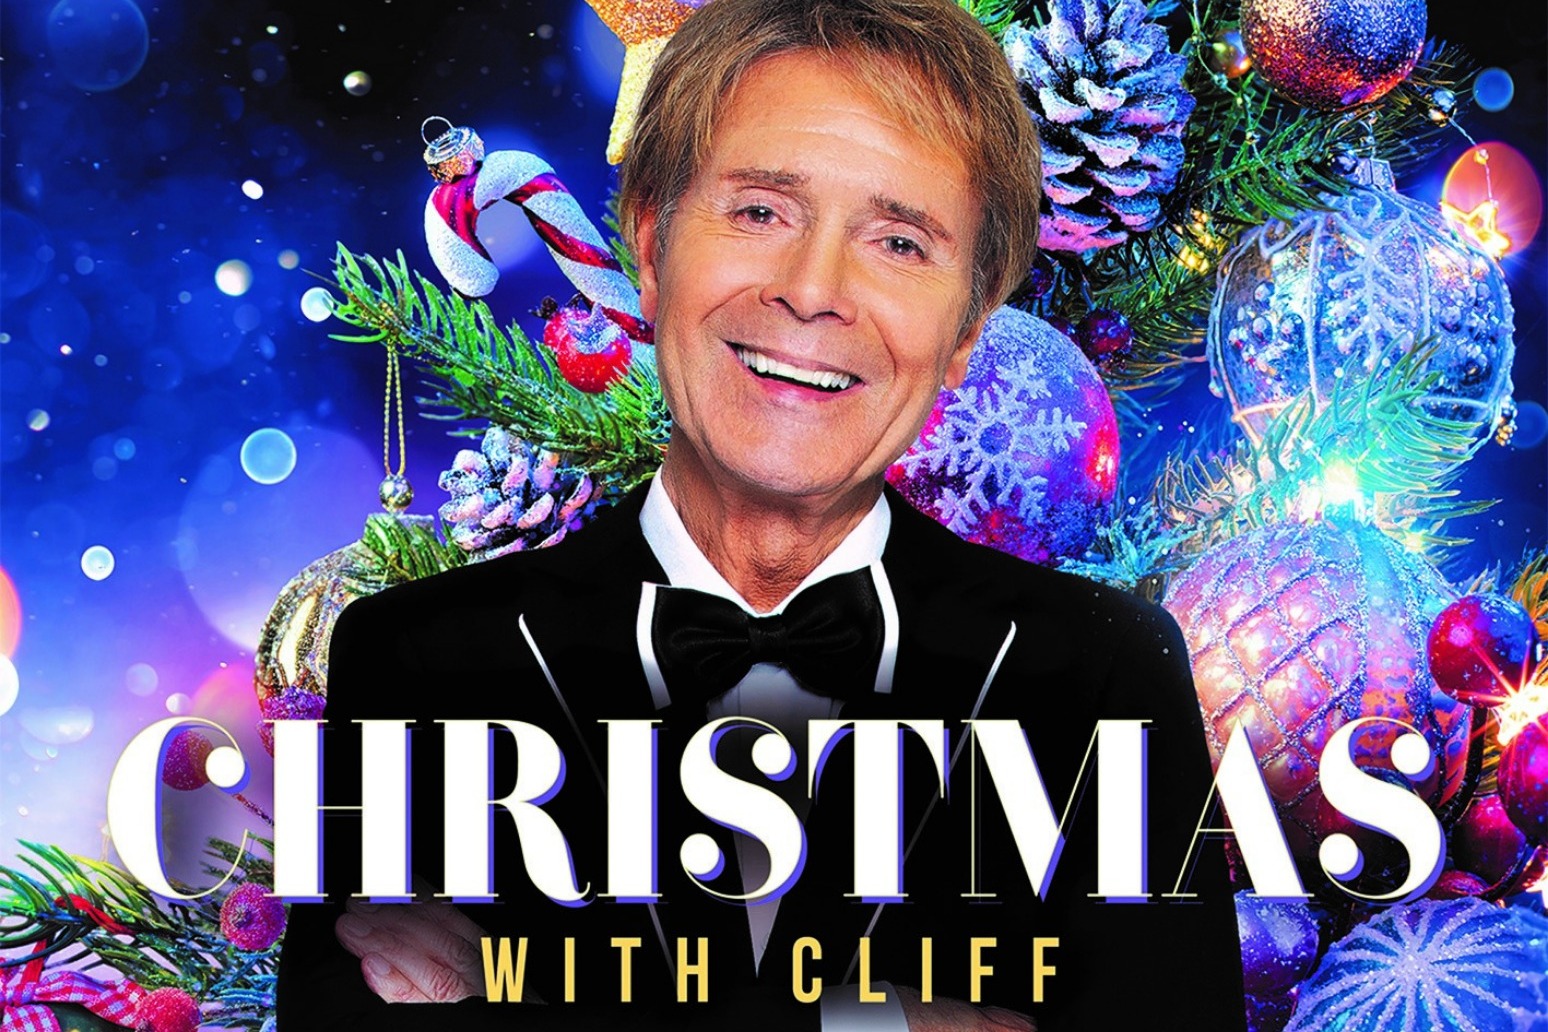 Sir Cliff Richard announces first Christmas album in 19 years 